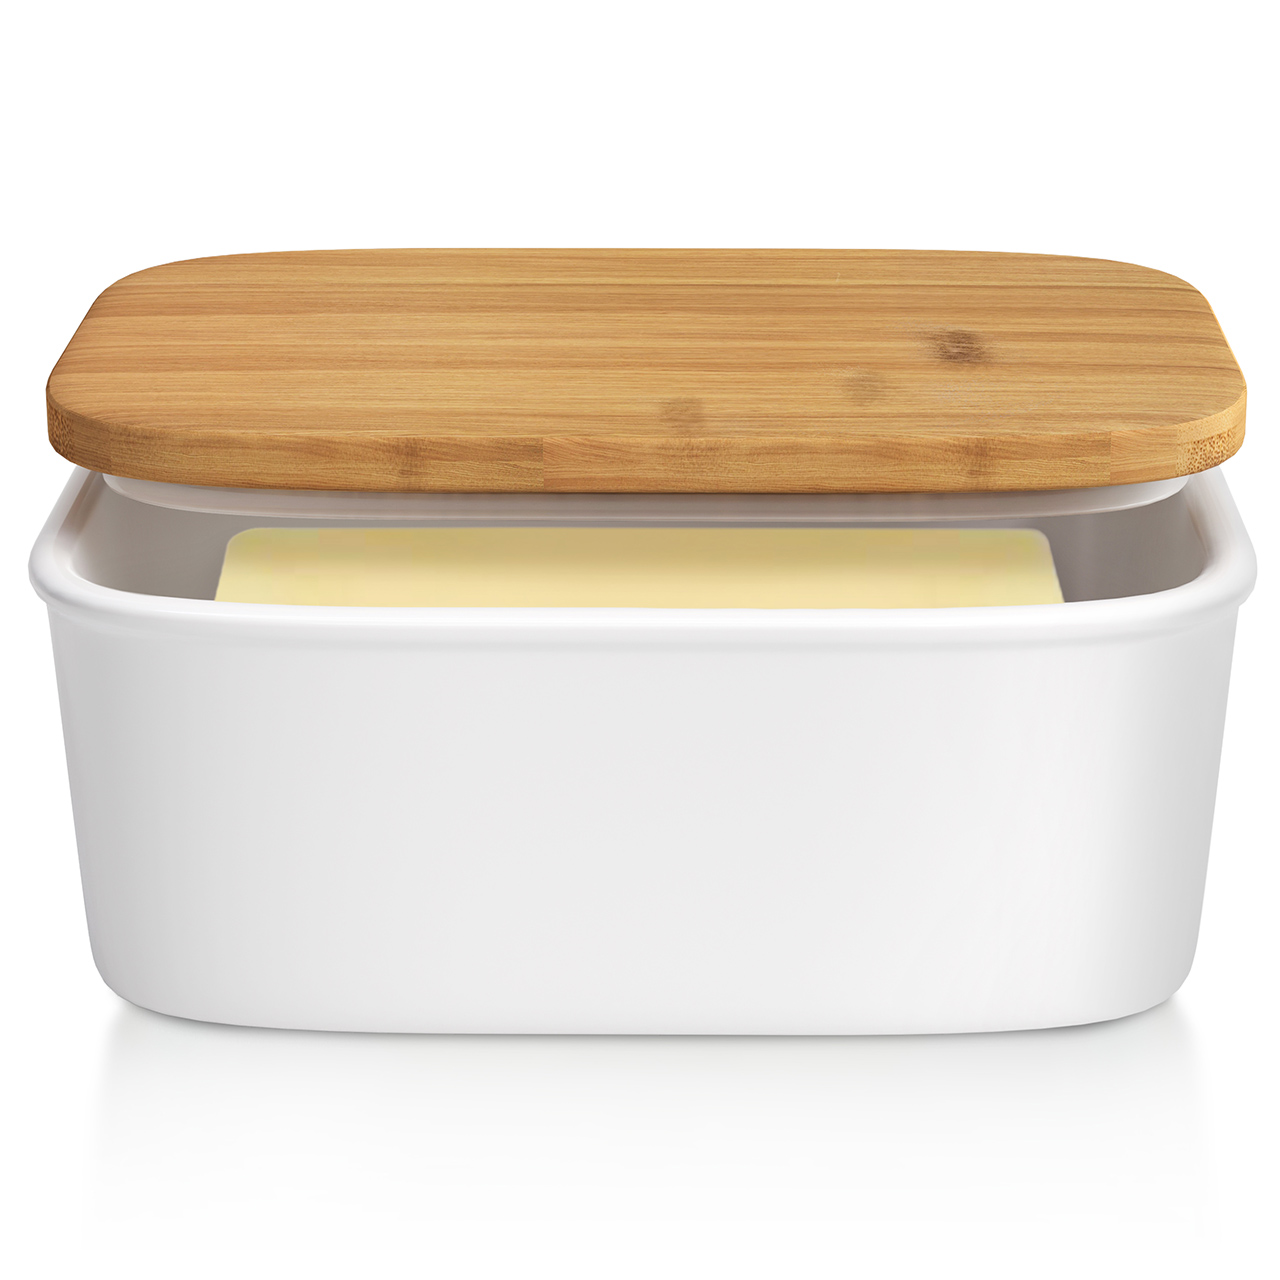 Ceramic Butter Dish with Bamboo Lid